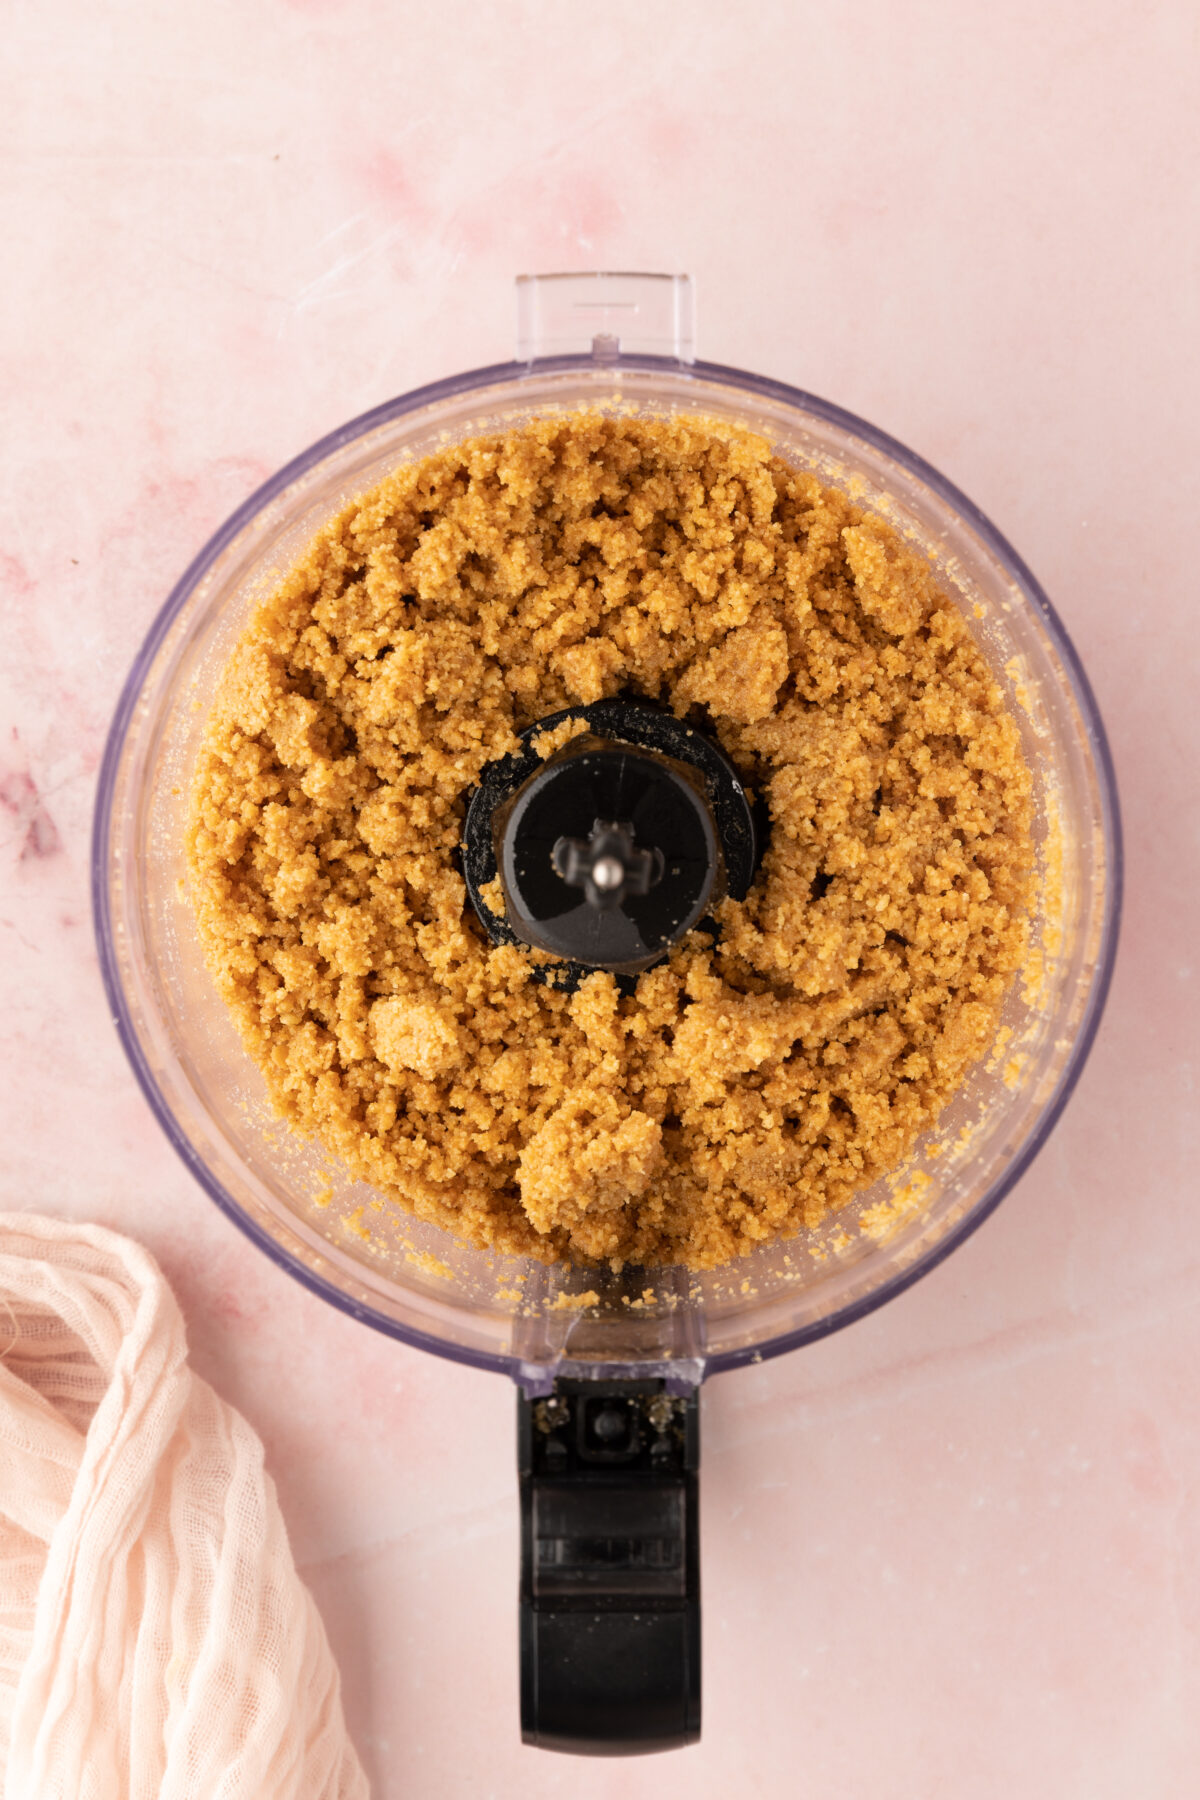 Graham crumbs, butter, and brown sugar combined in a food processor.